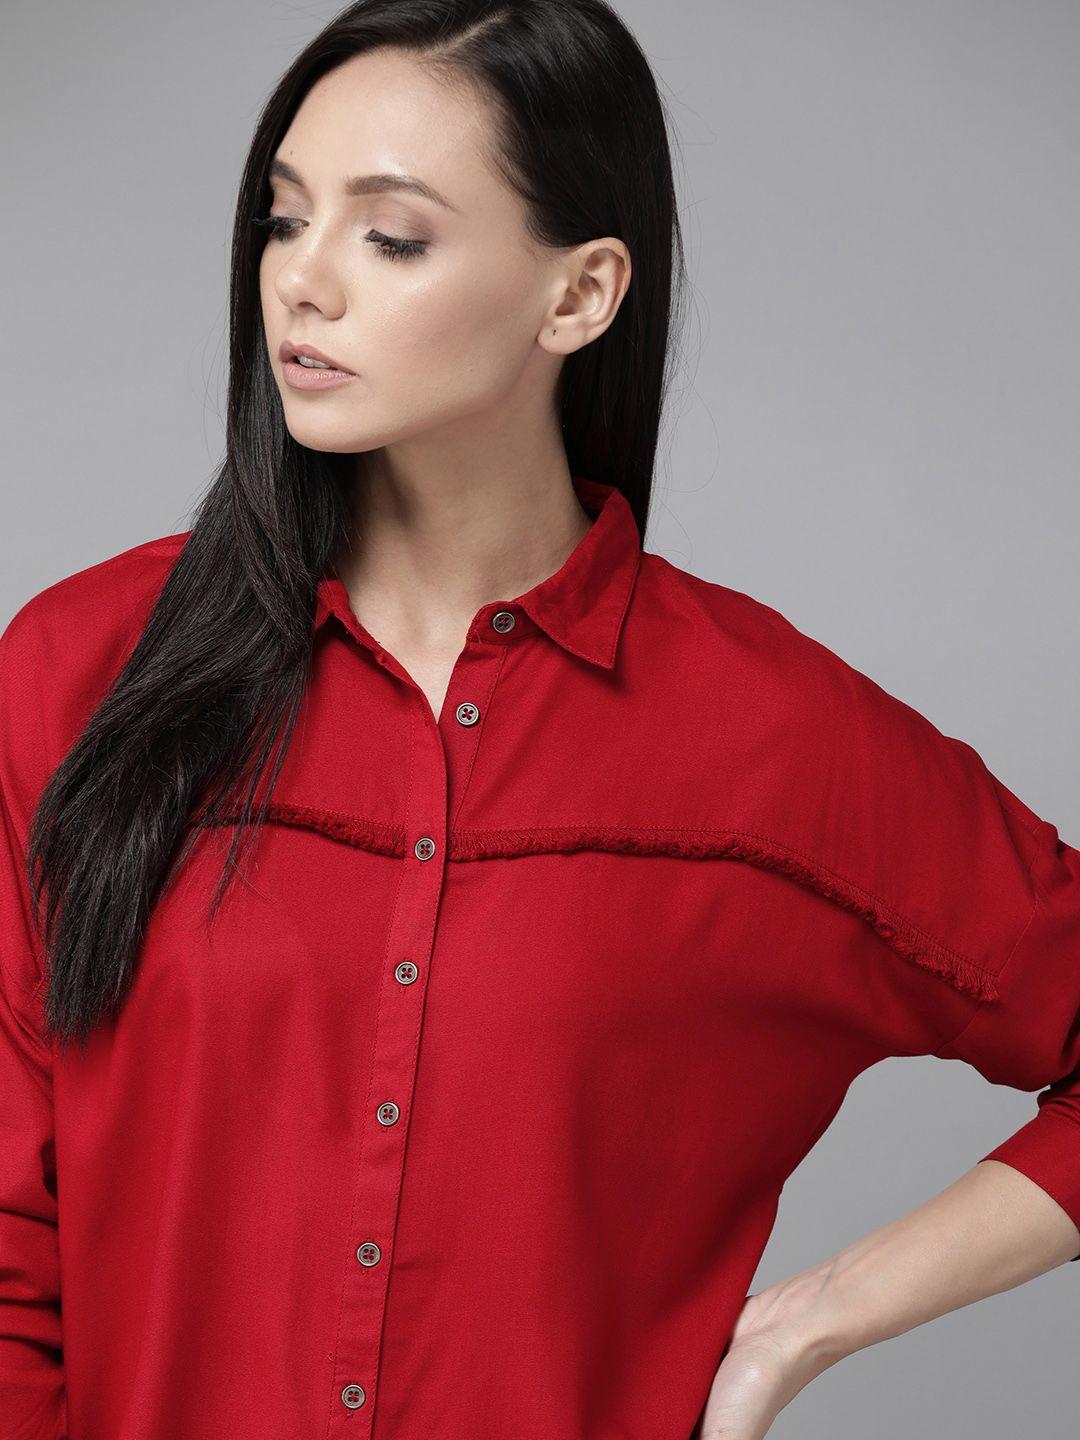 the roadster lifestyle co women red regular fit solid casual shirt